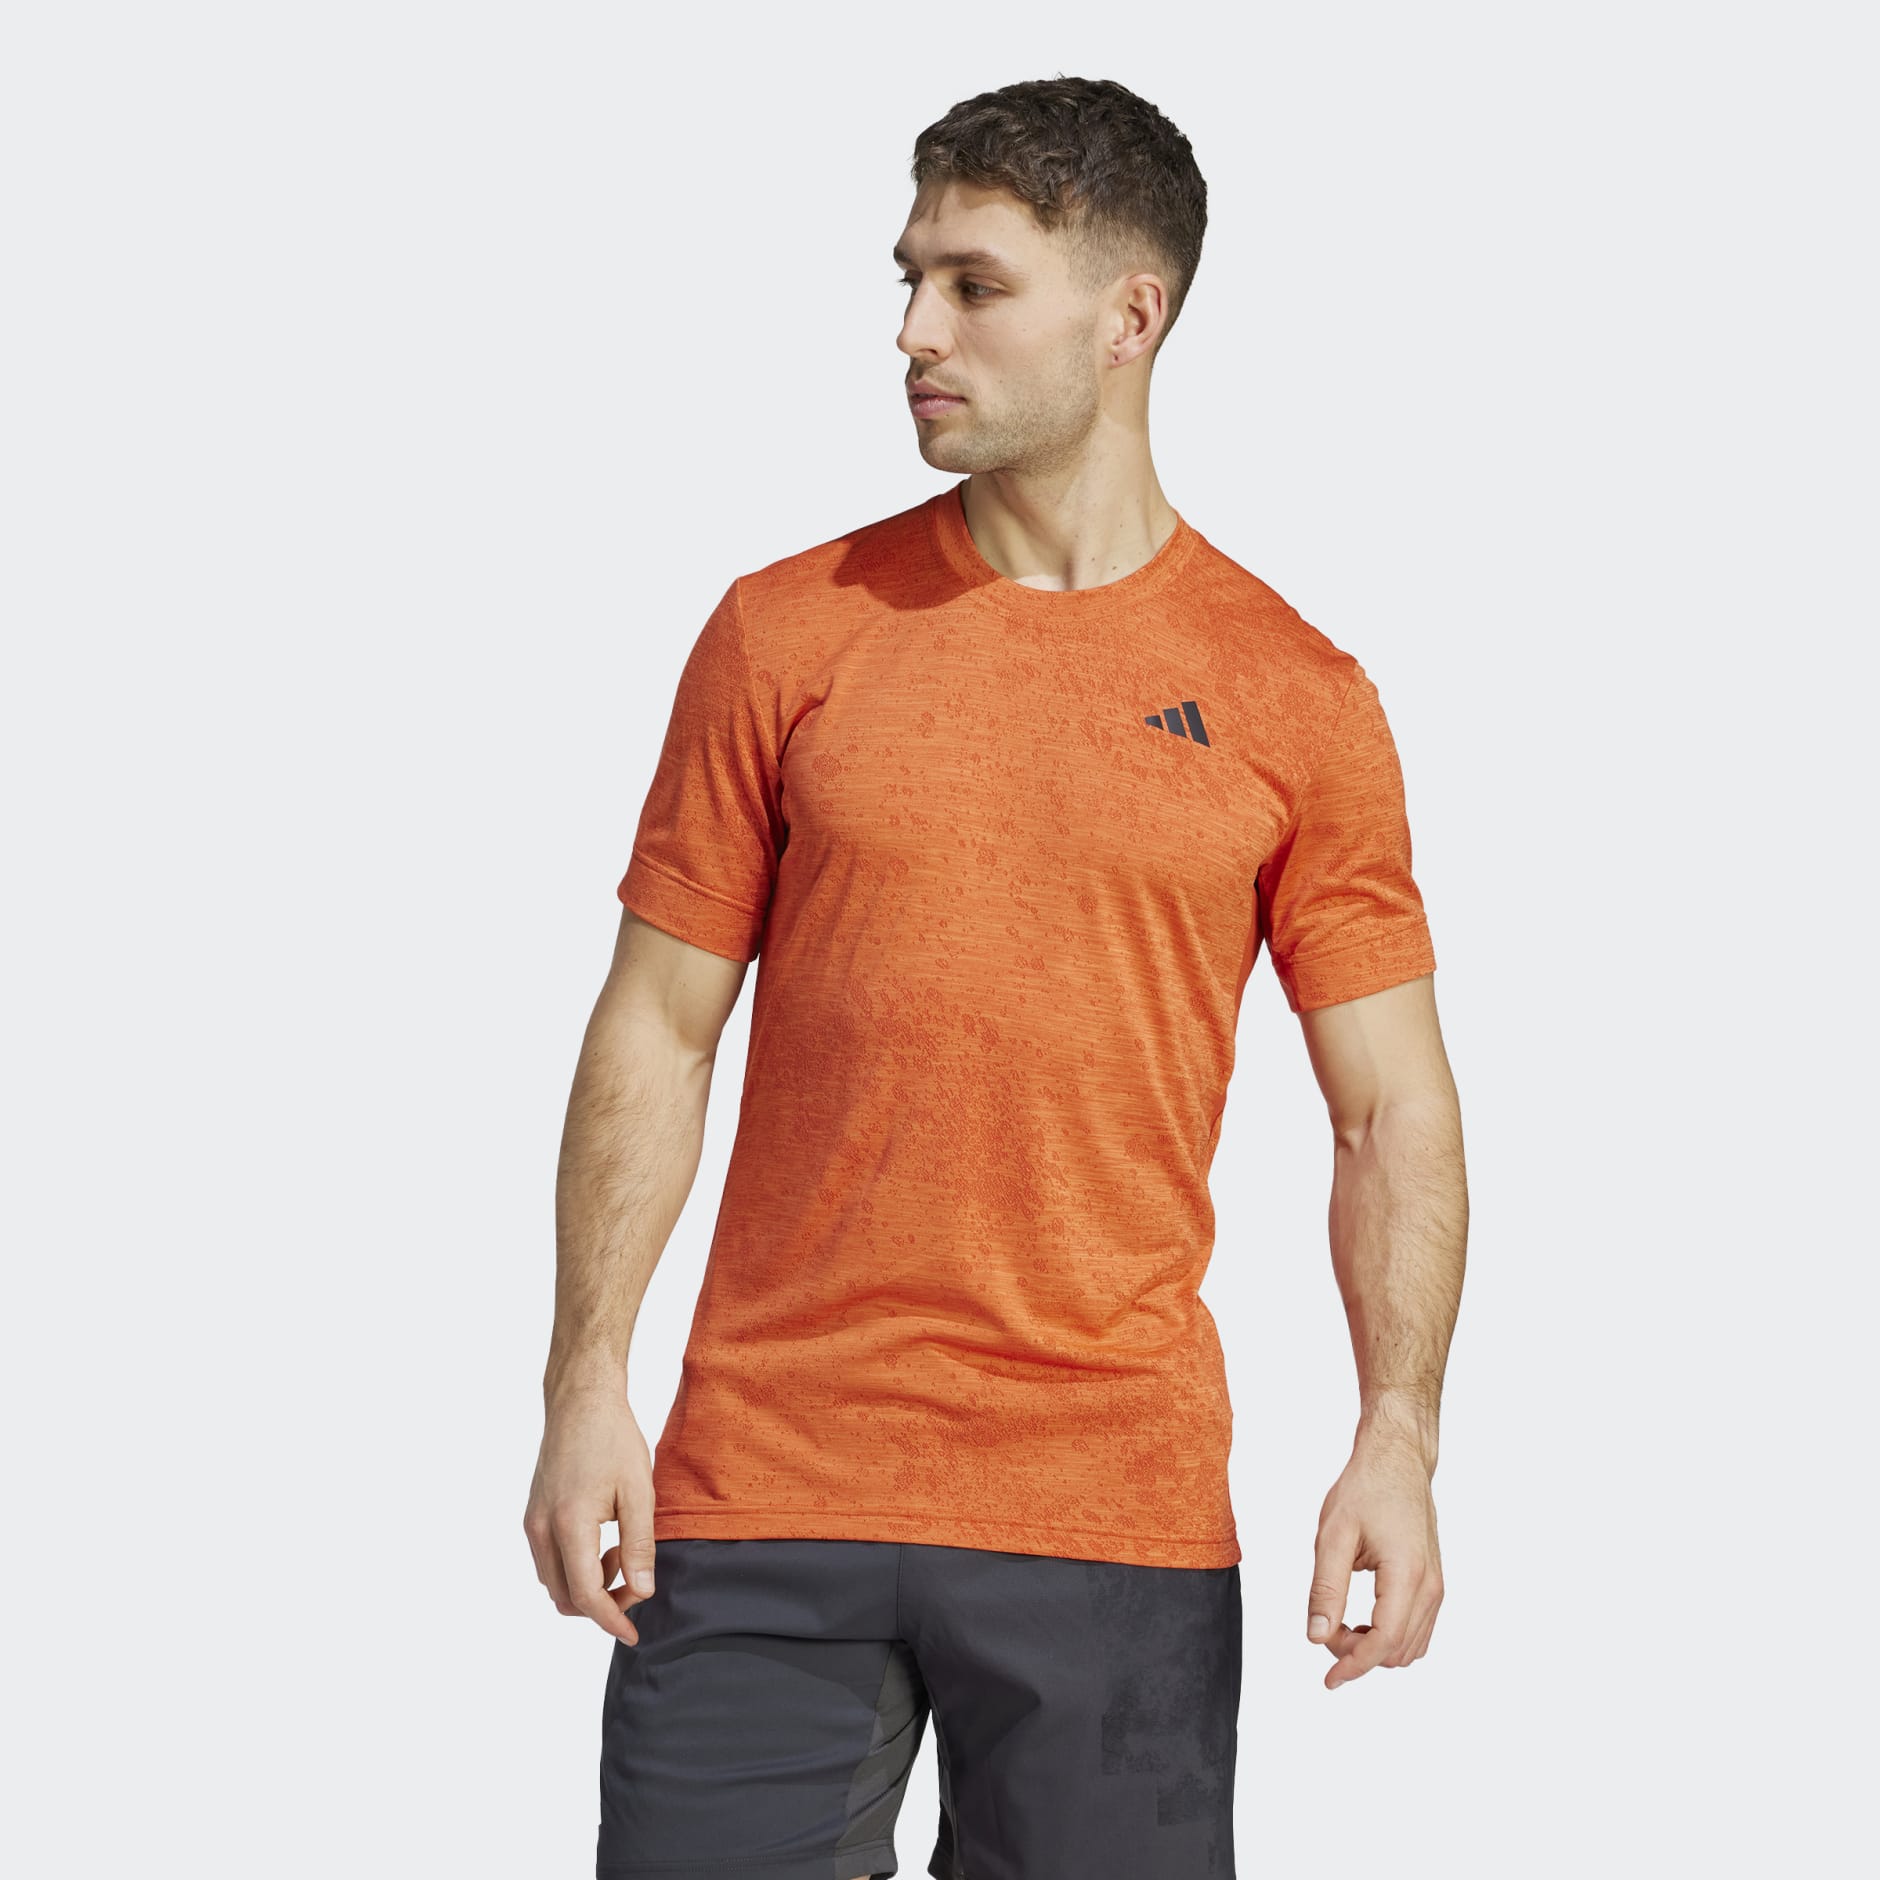 Clothing - Tennis FreeLift Tee - Red | adidas South Africa